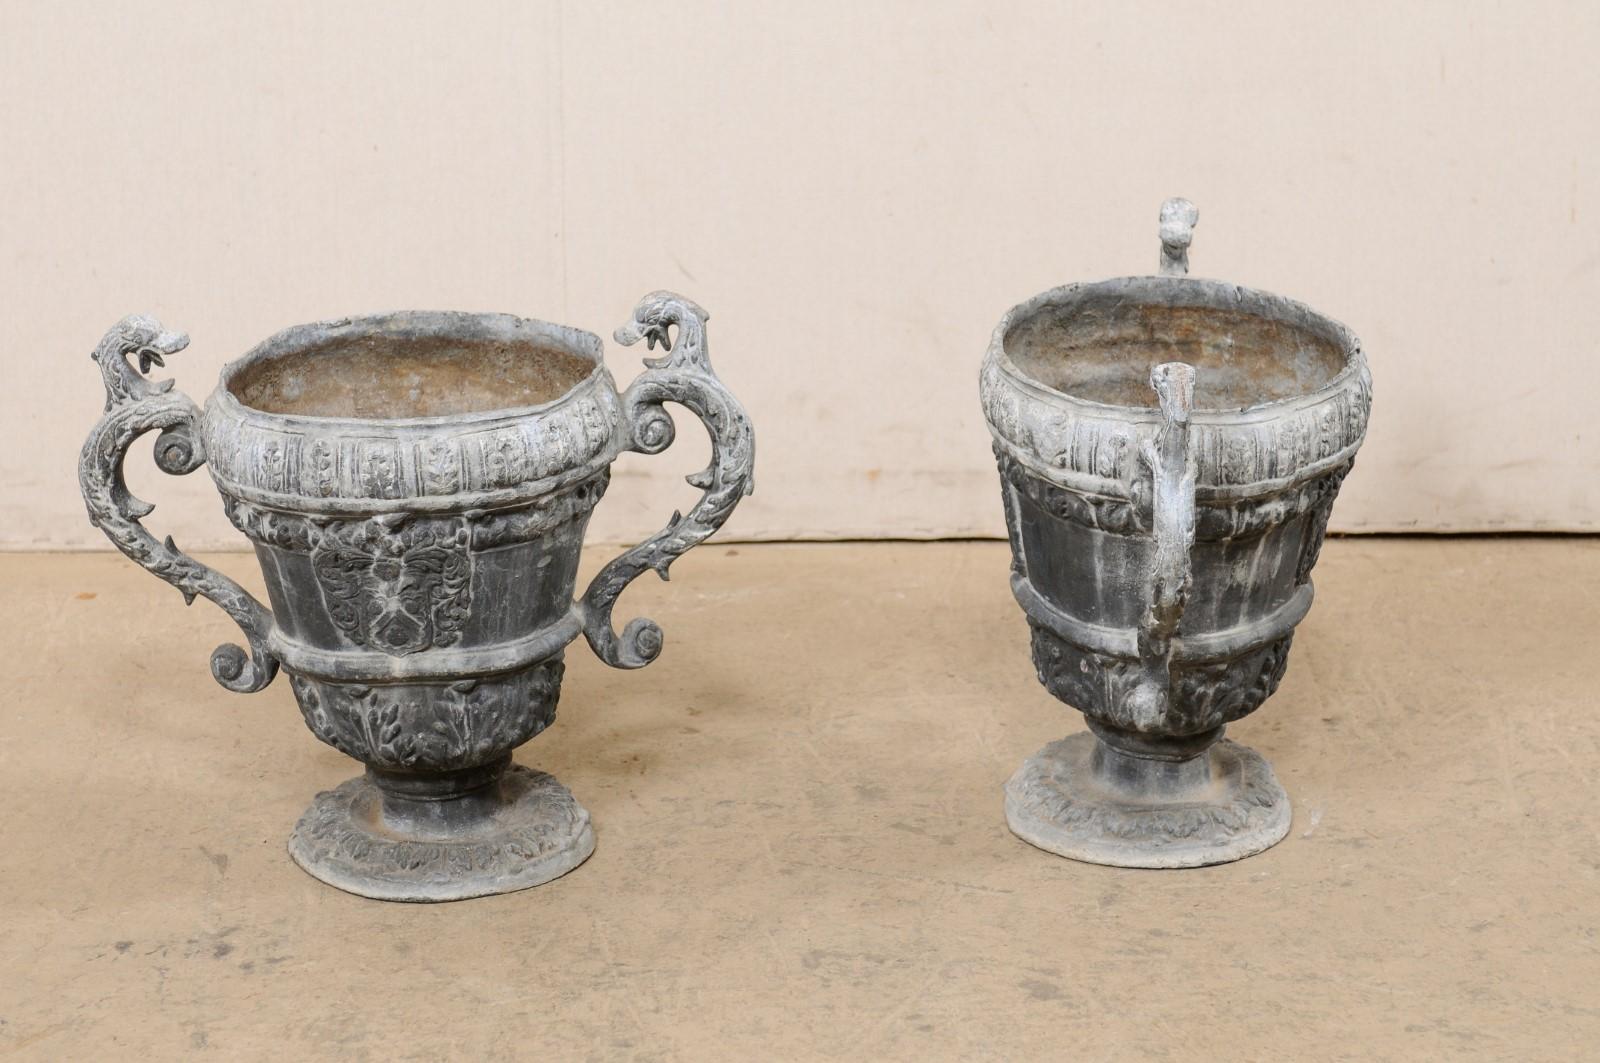 French Pair of 18th C. Decorative Lead Urn Planters for Garden Patio For Sale 2